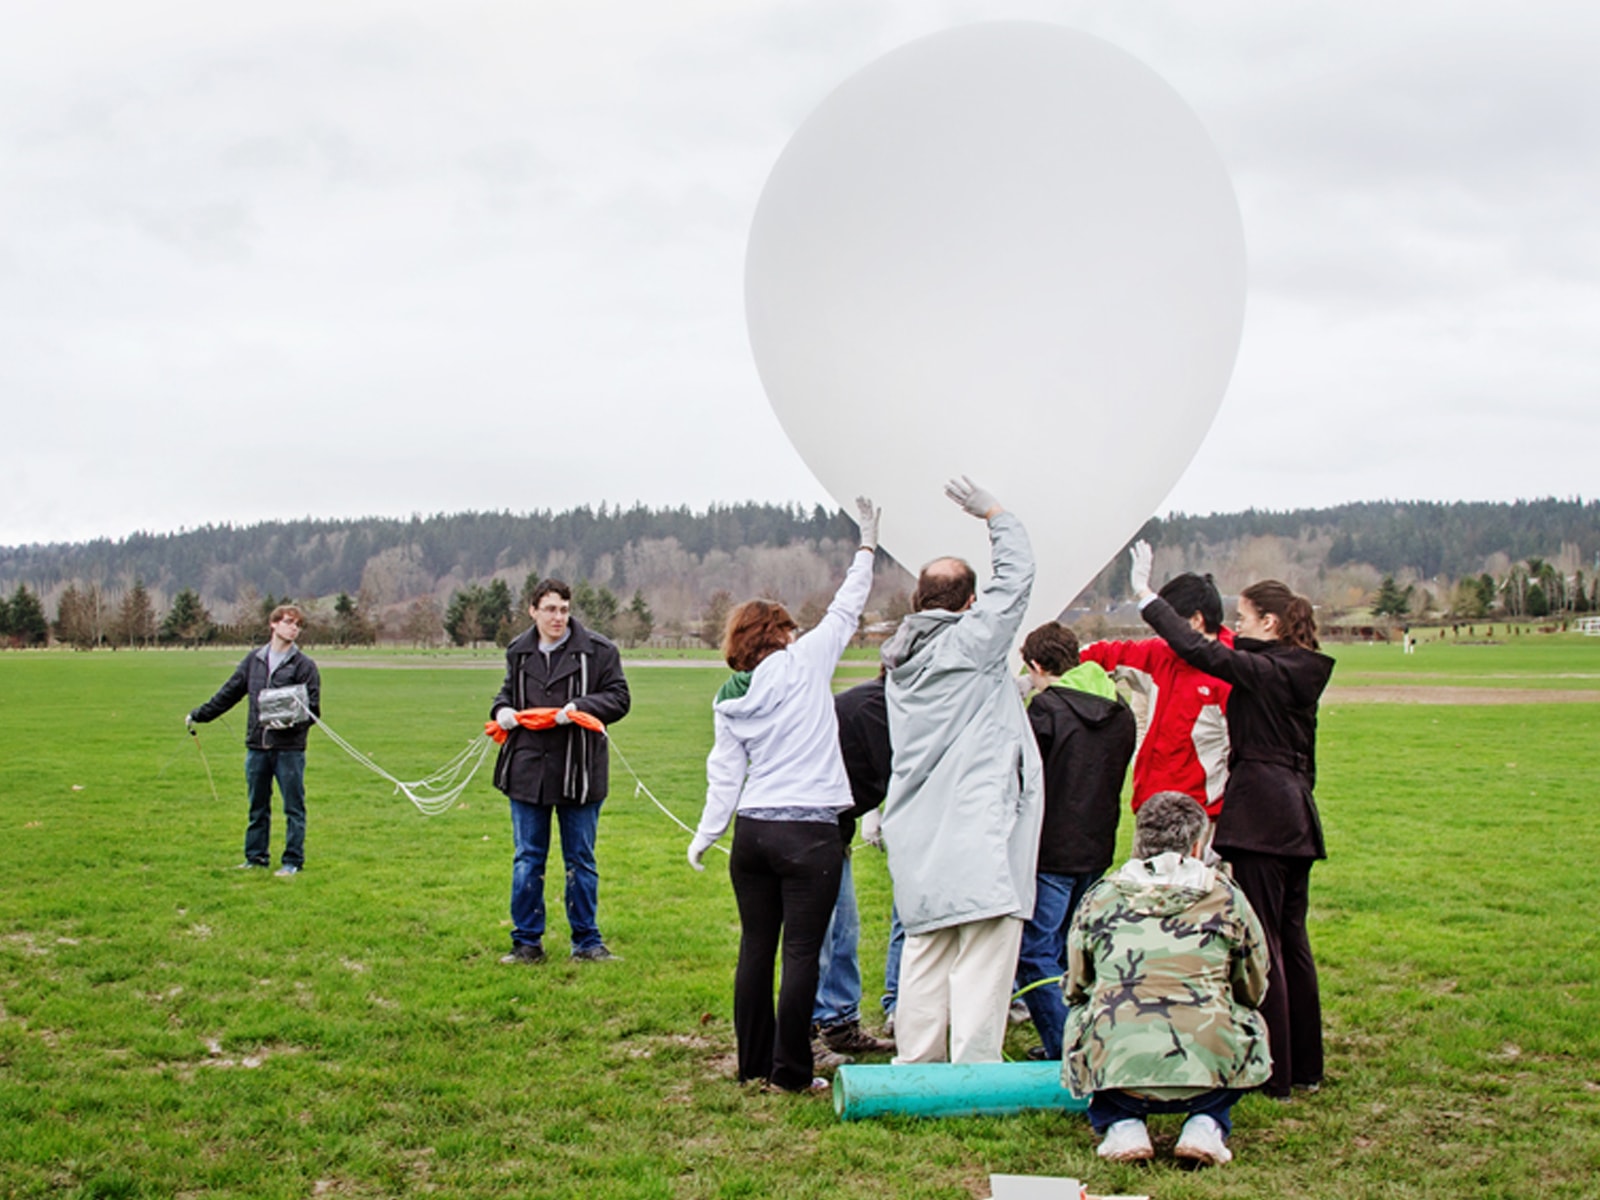 DigiPen students launching a large high-altitude balloon at 60 Acres Park in Redmond